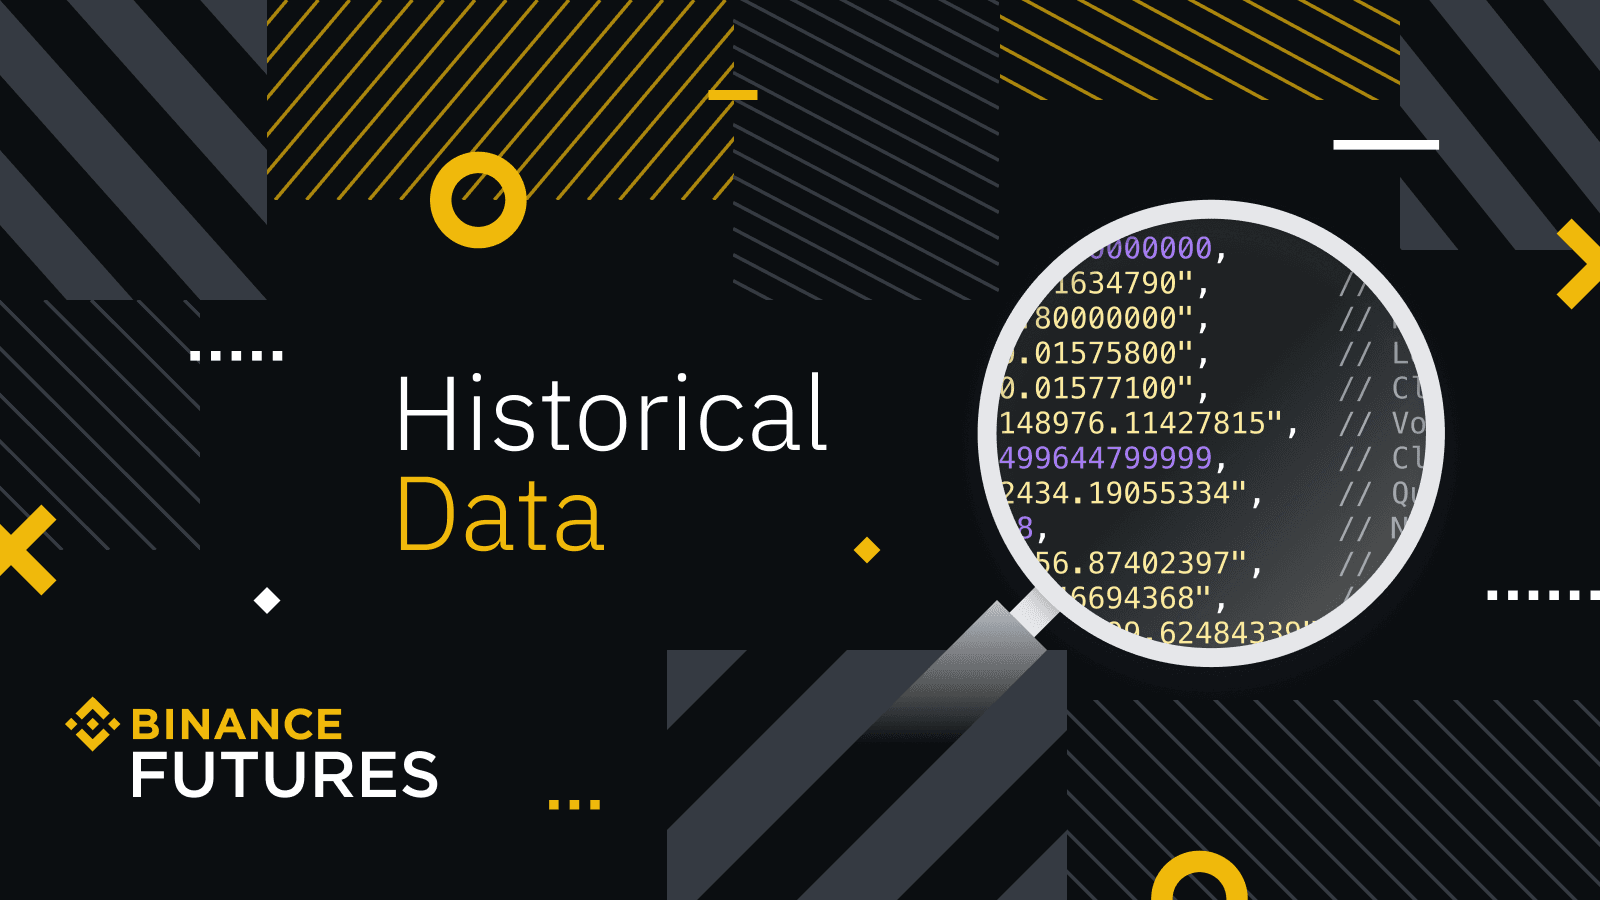 Backtest Your Trading Strategy With Binance Futures Historical Data